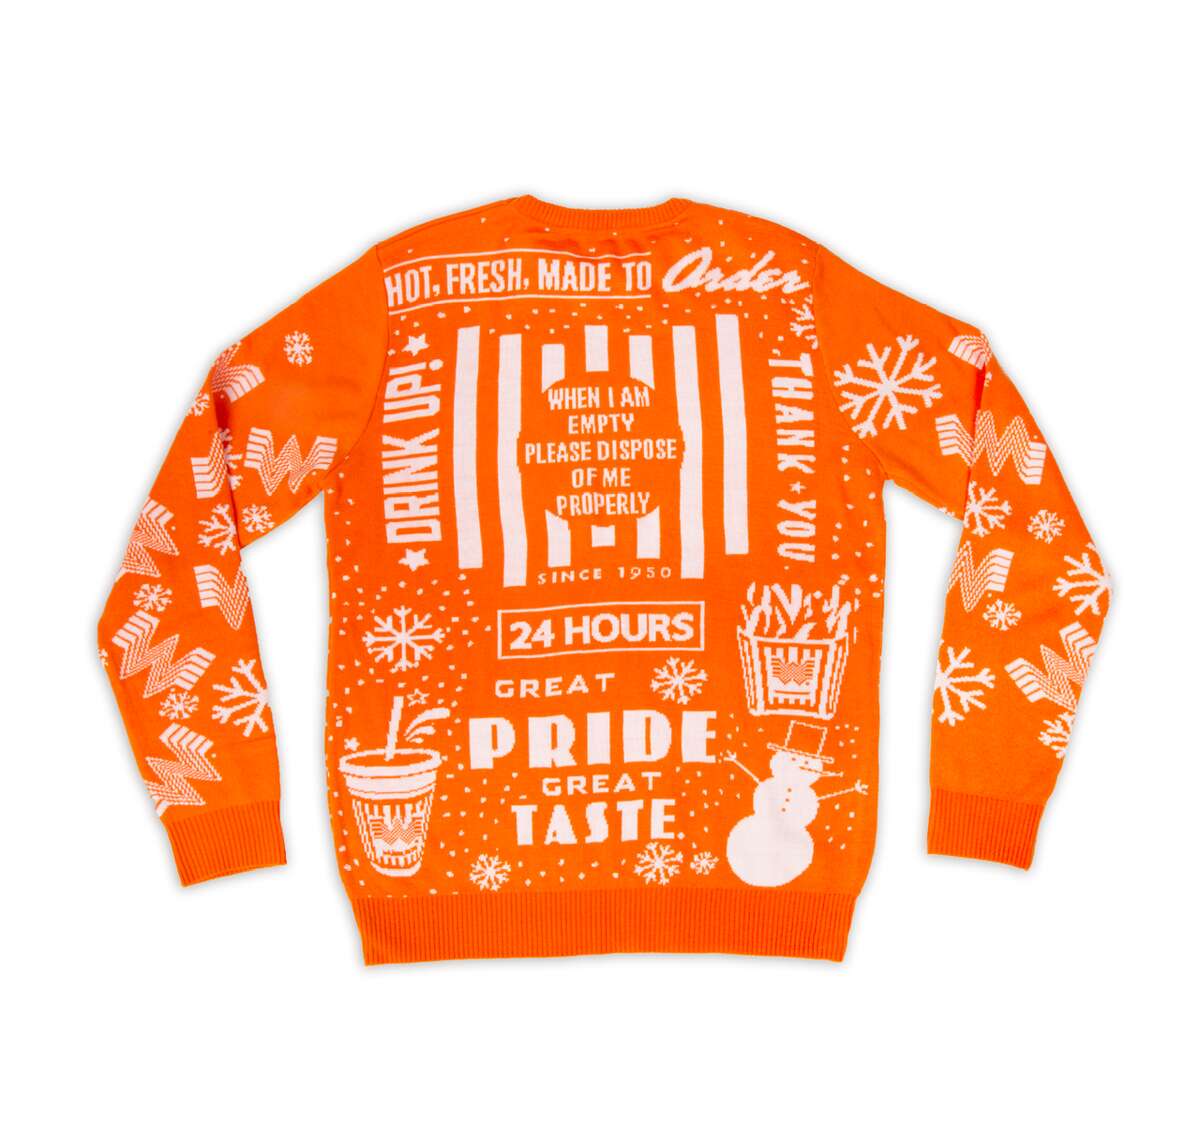 Whataburger  2019 Christmas sweater Available: While supplies last "Whether you’re spending the holidays curled up by the fire or rockin’ around the Christmas tree, our cozy and festive Christmas Sweater is guaranteed to be a staple in your winter wardrobe." (whataburger.com)